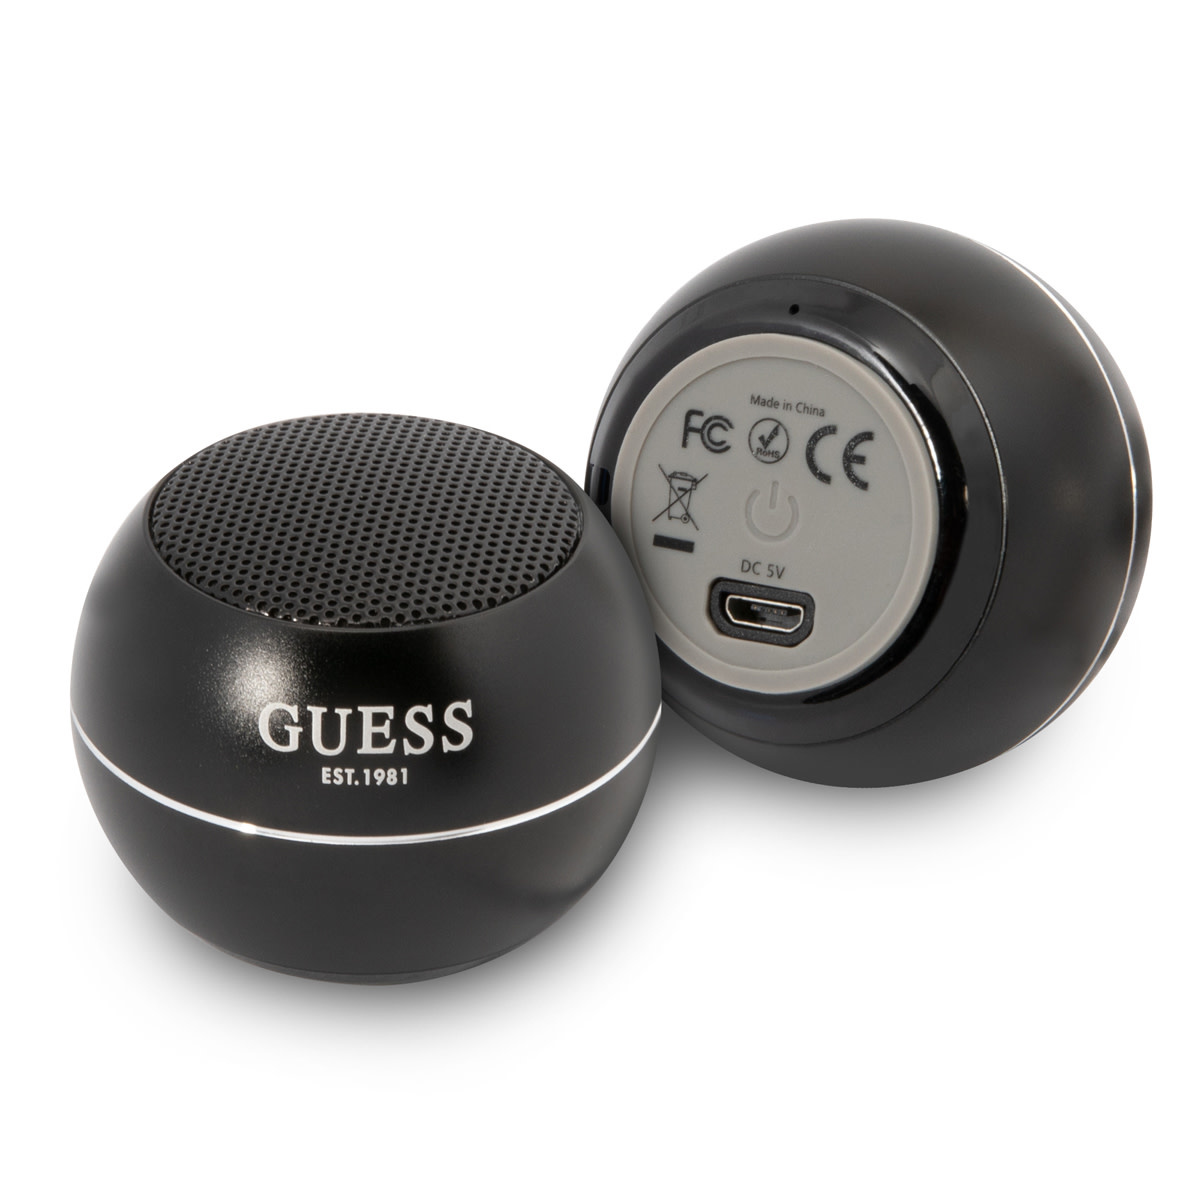 Guess Mini - 3W Power & 4H Playtime - Black - NT Accessoires - The Netherlands